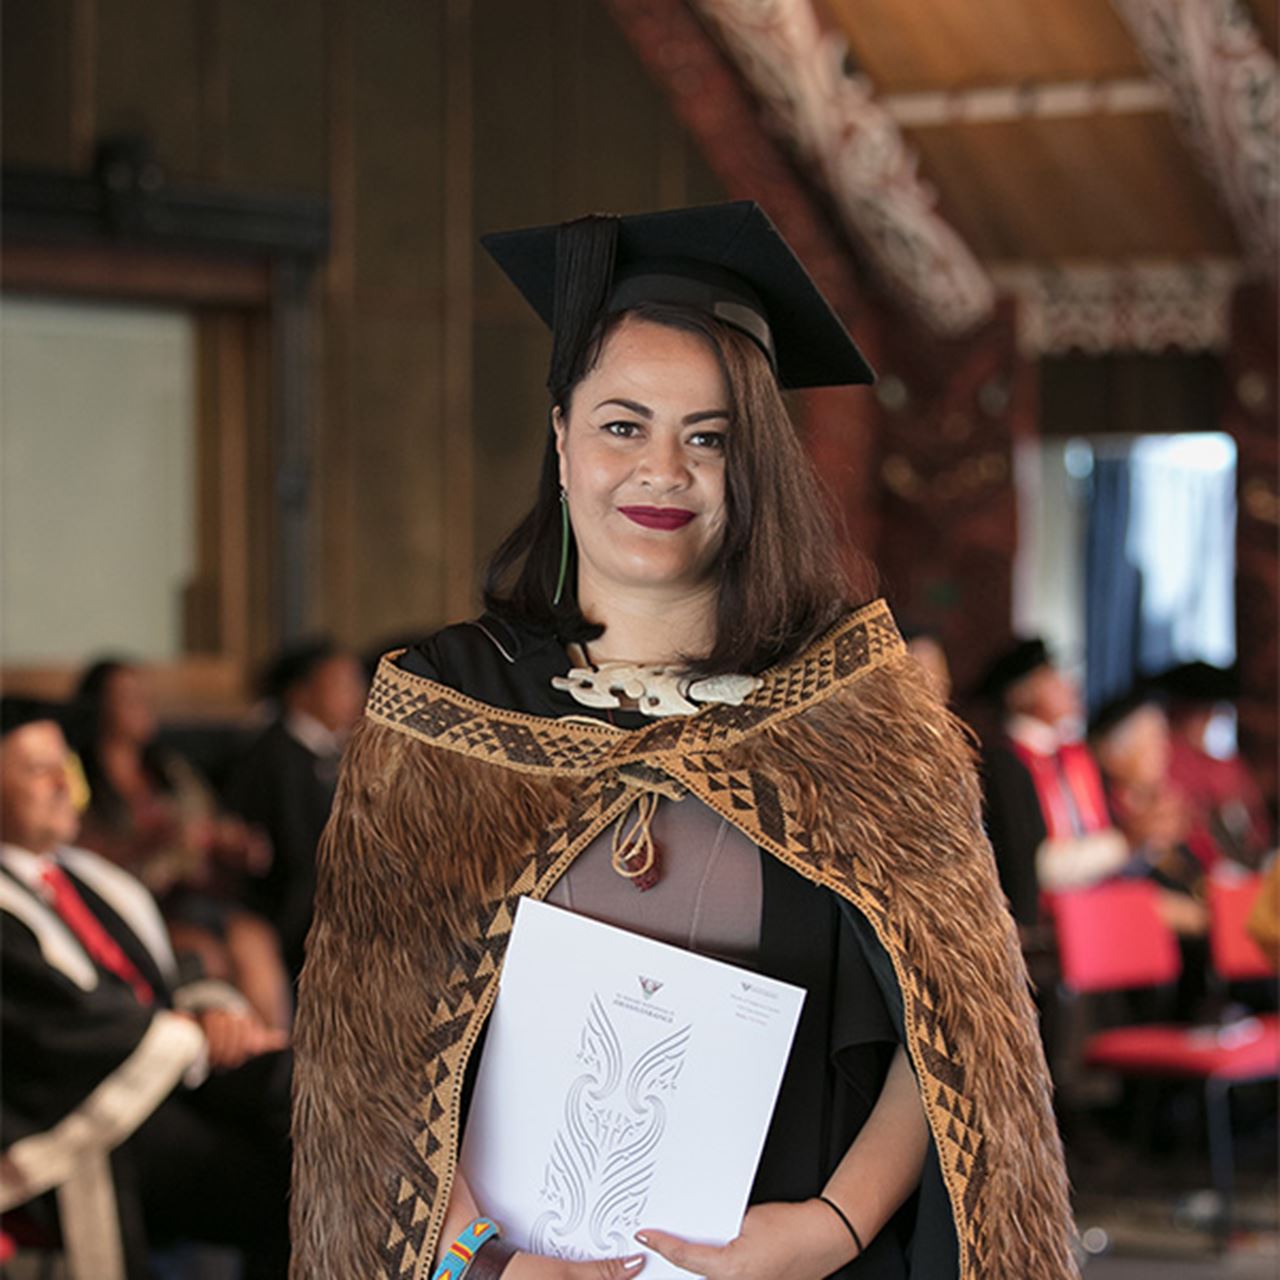 Hinerangi Busby graduated with the Masters of Indigenous Studies in 2018